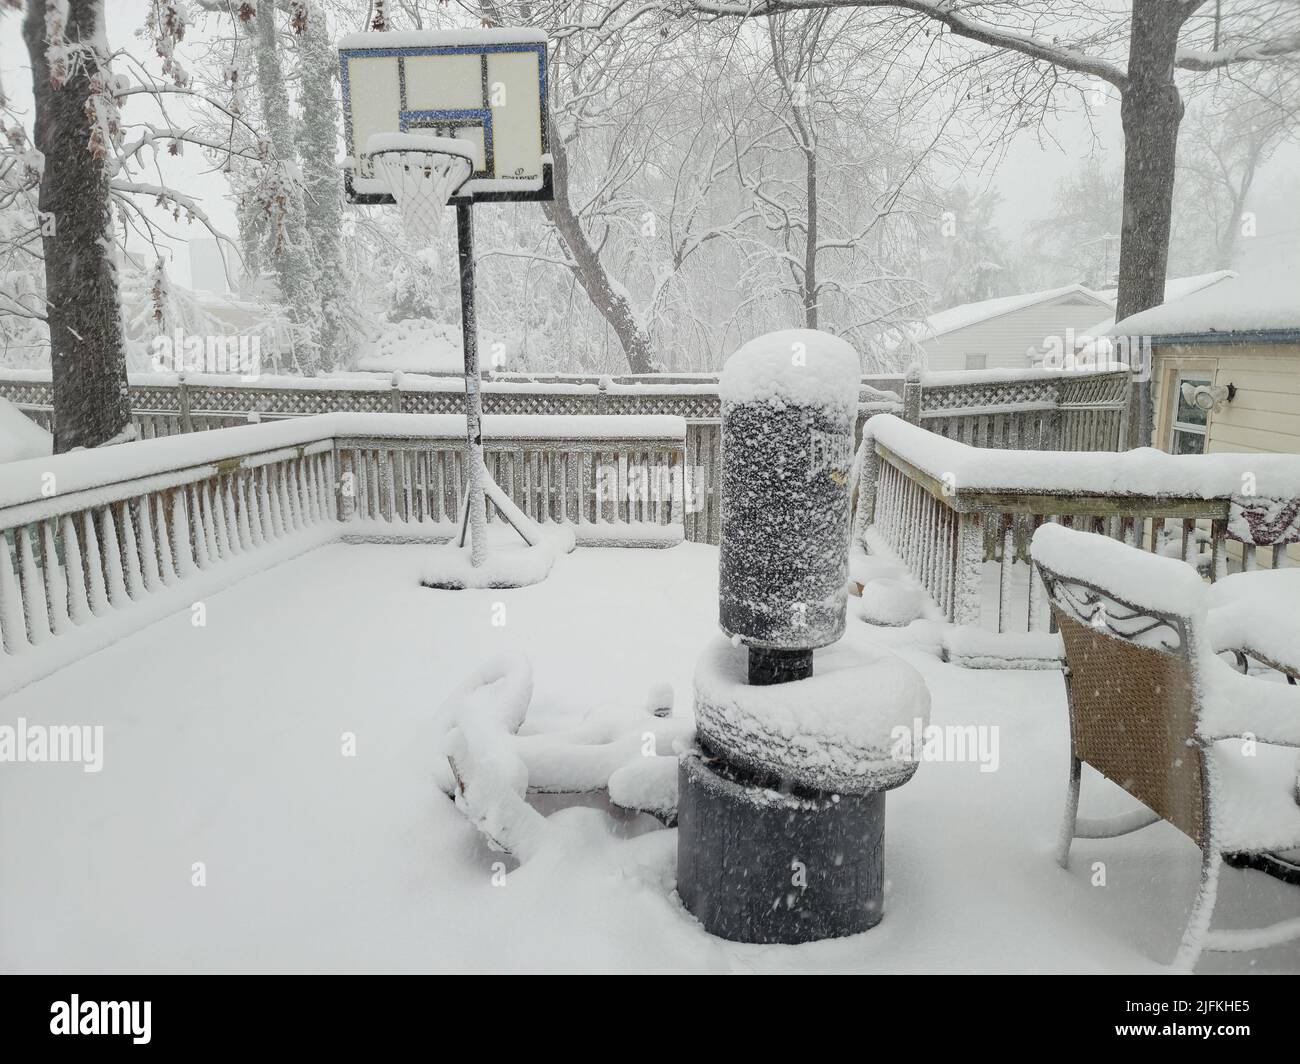 punching bag and basketball hoop on deck covered in snow in winter. Stock Photo